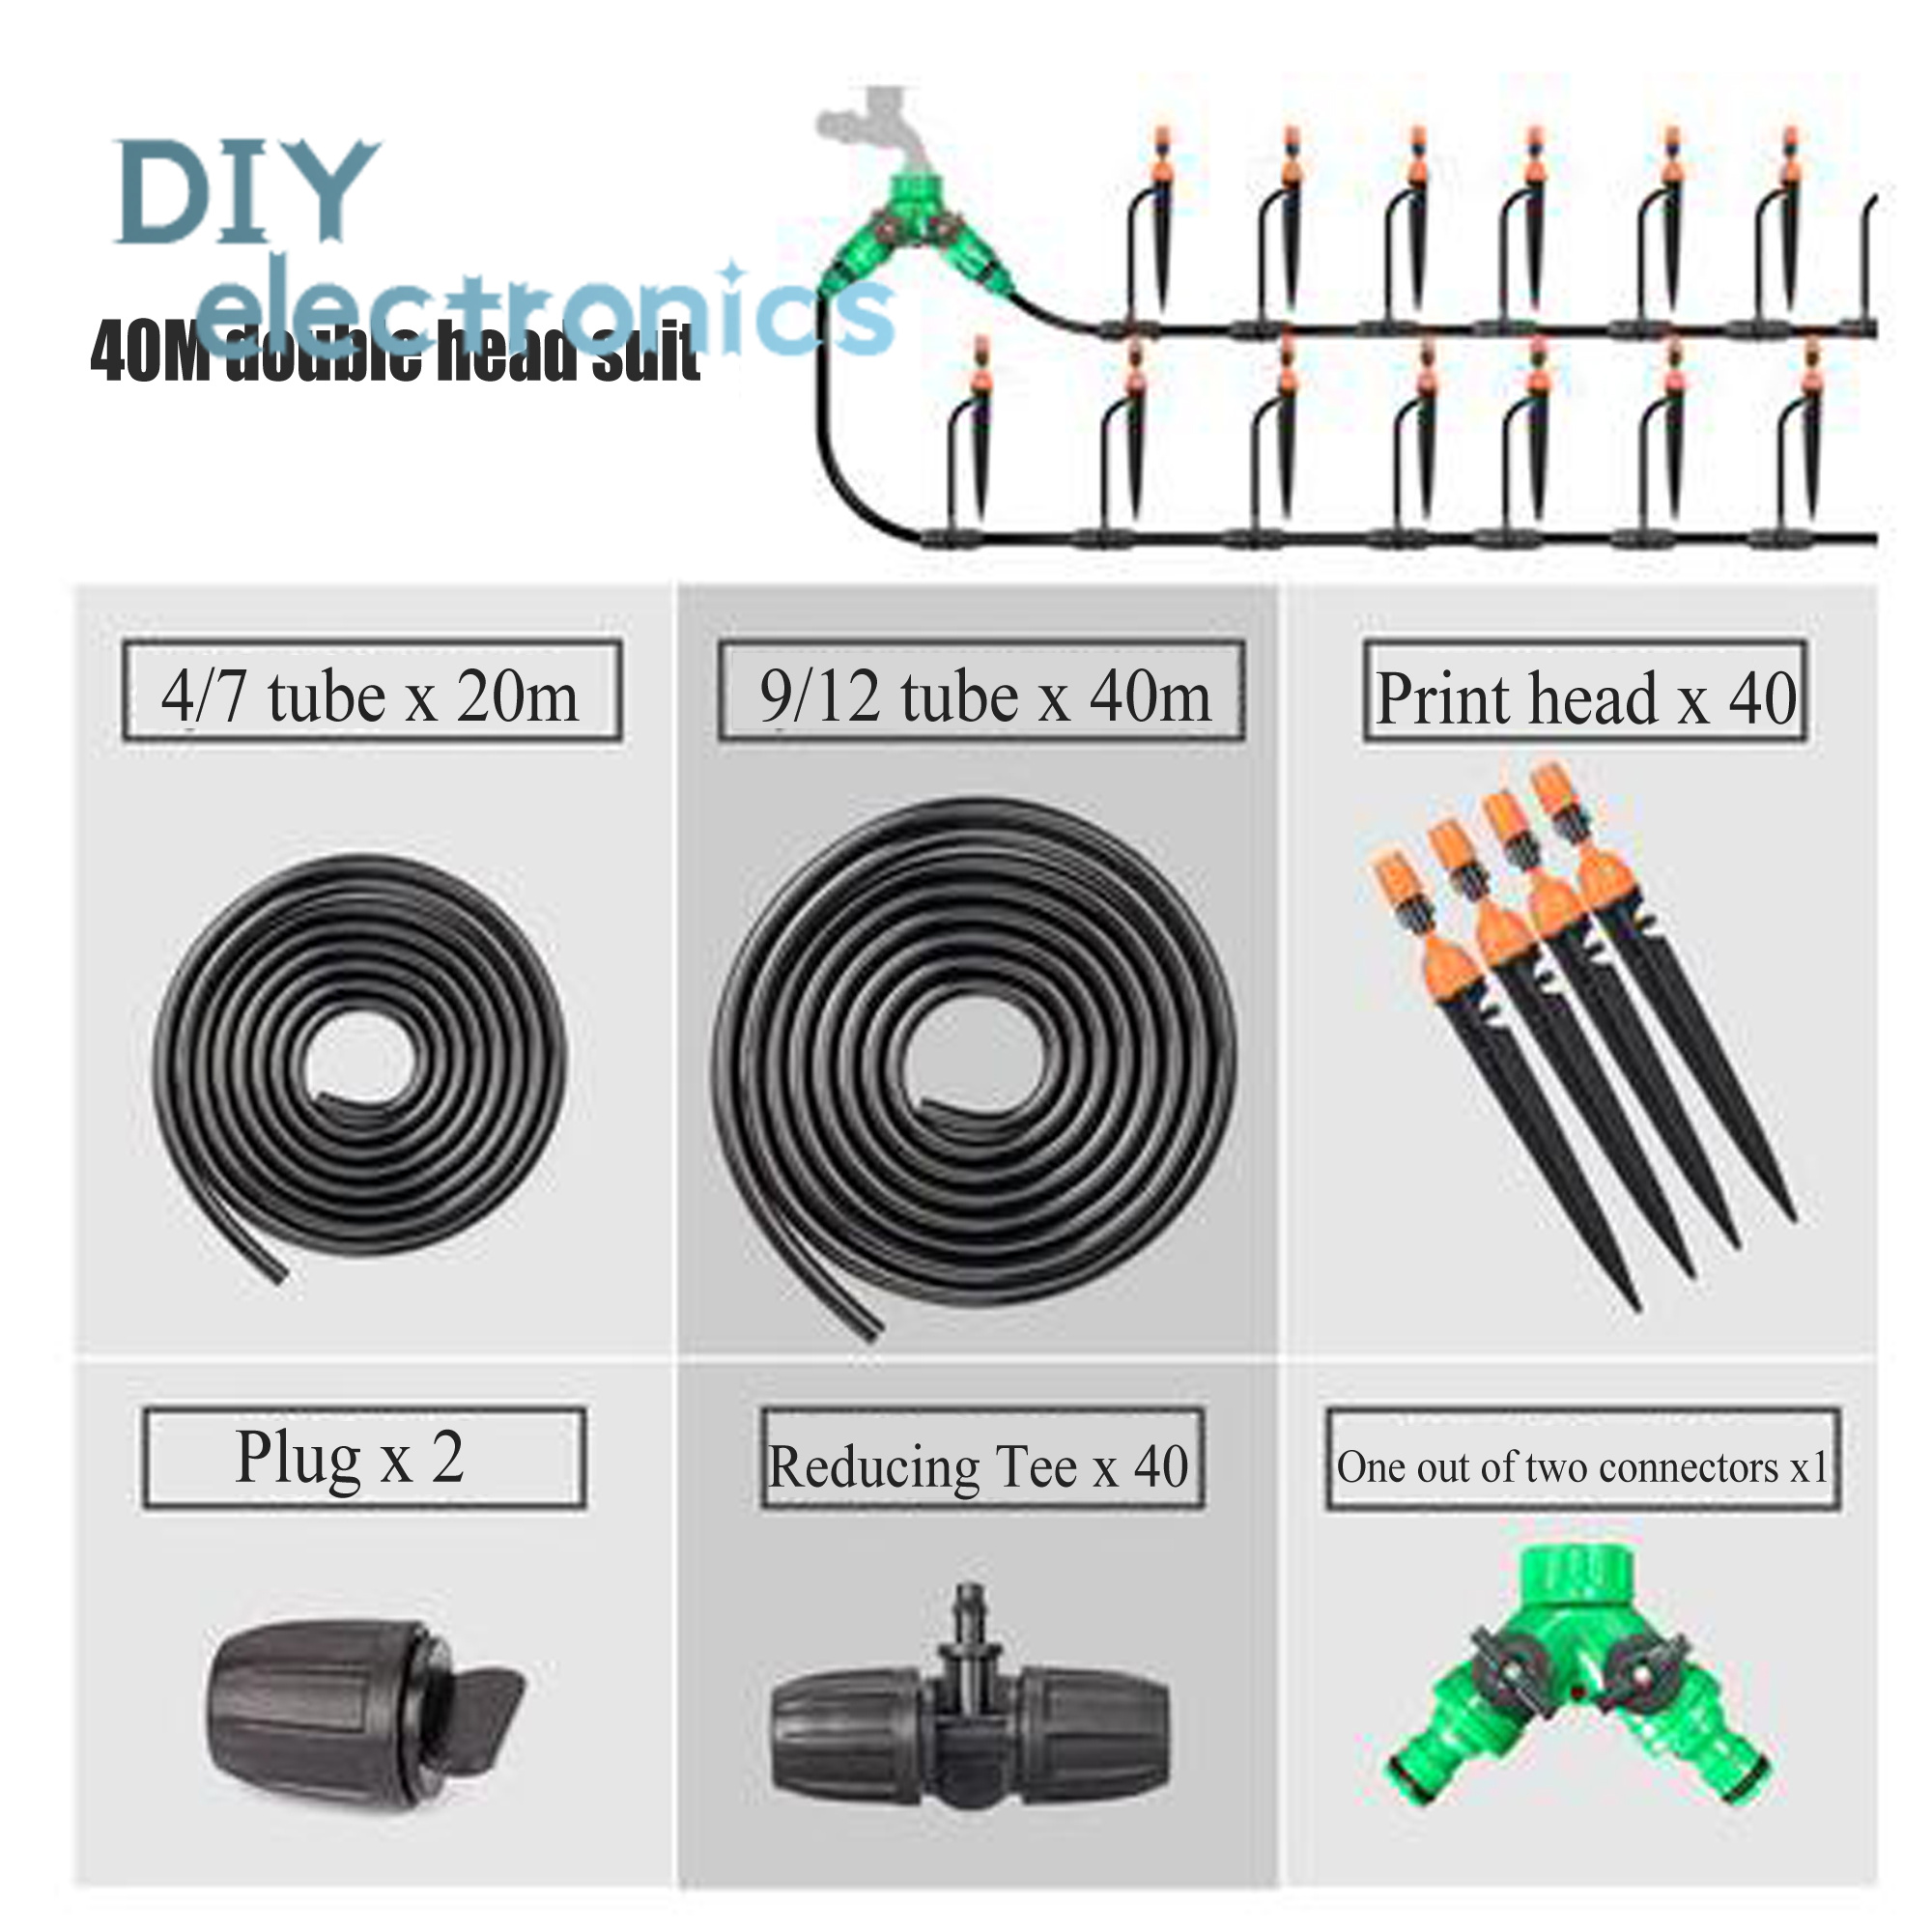 Details about   Lawn Garden Pop Up Spray Head Irrigation Watering System Tool kit US 